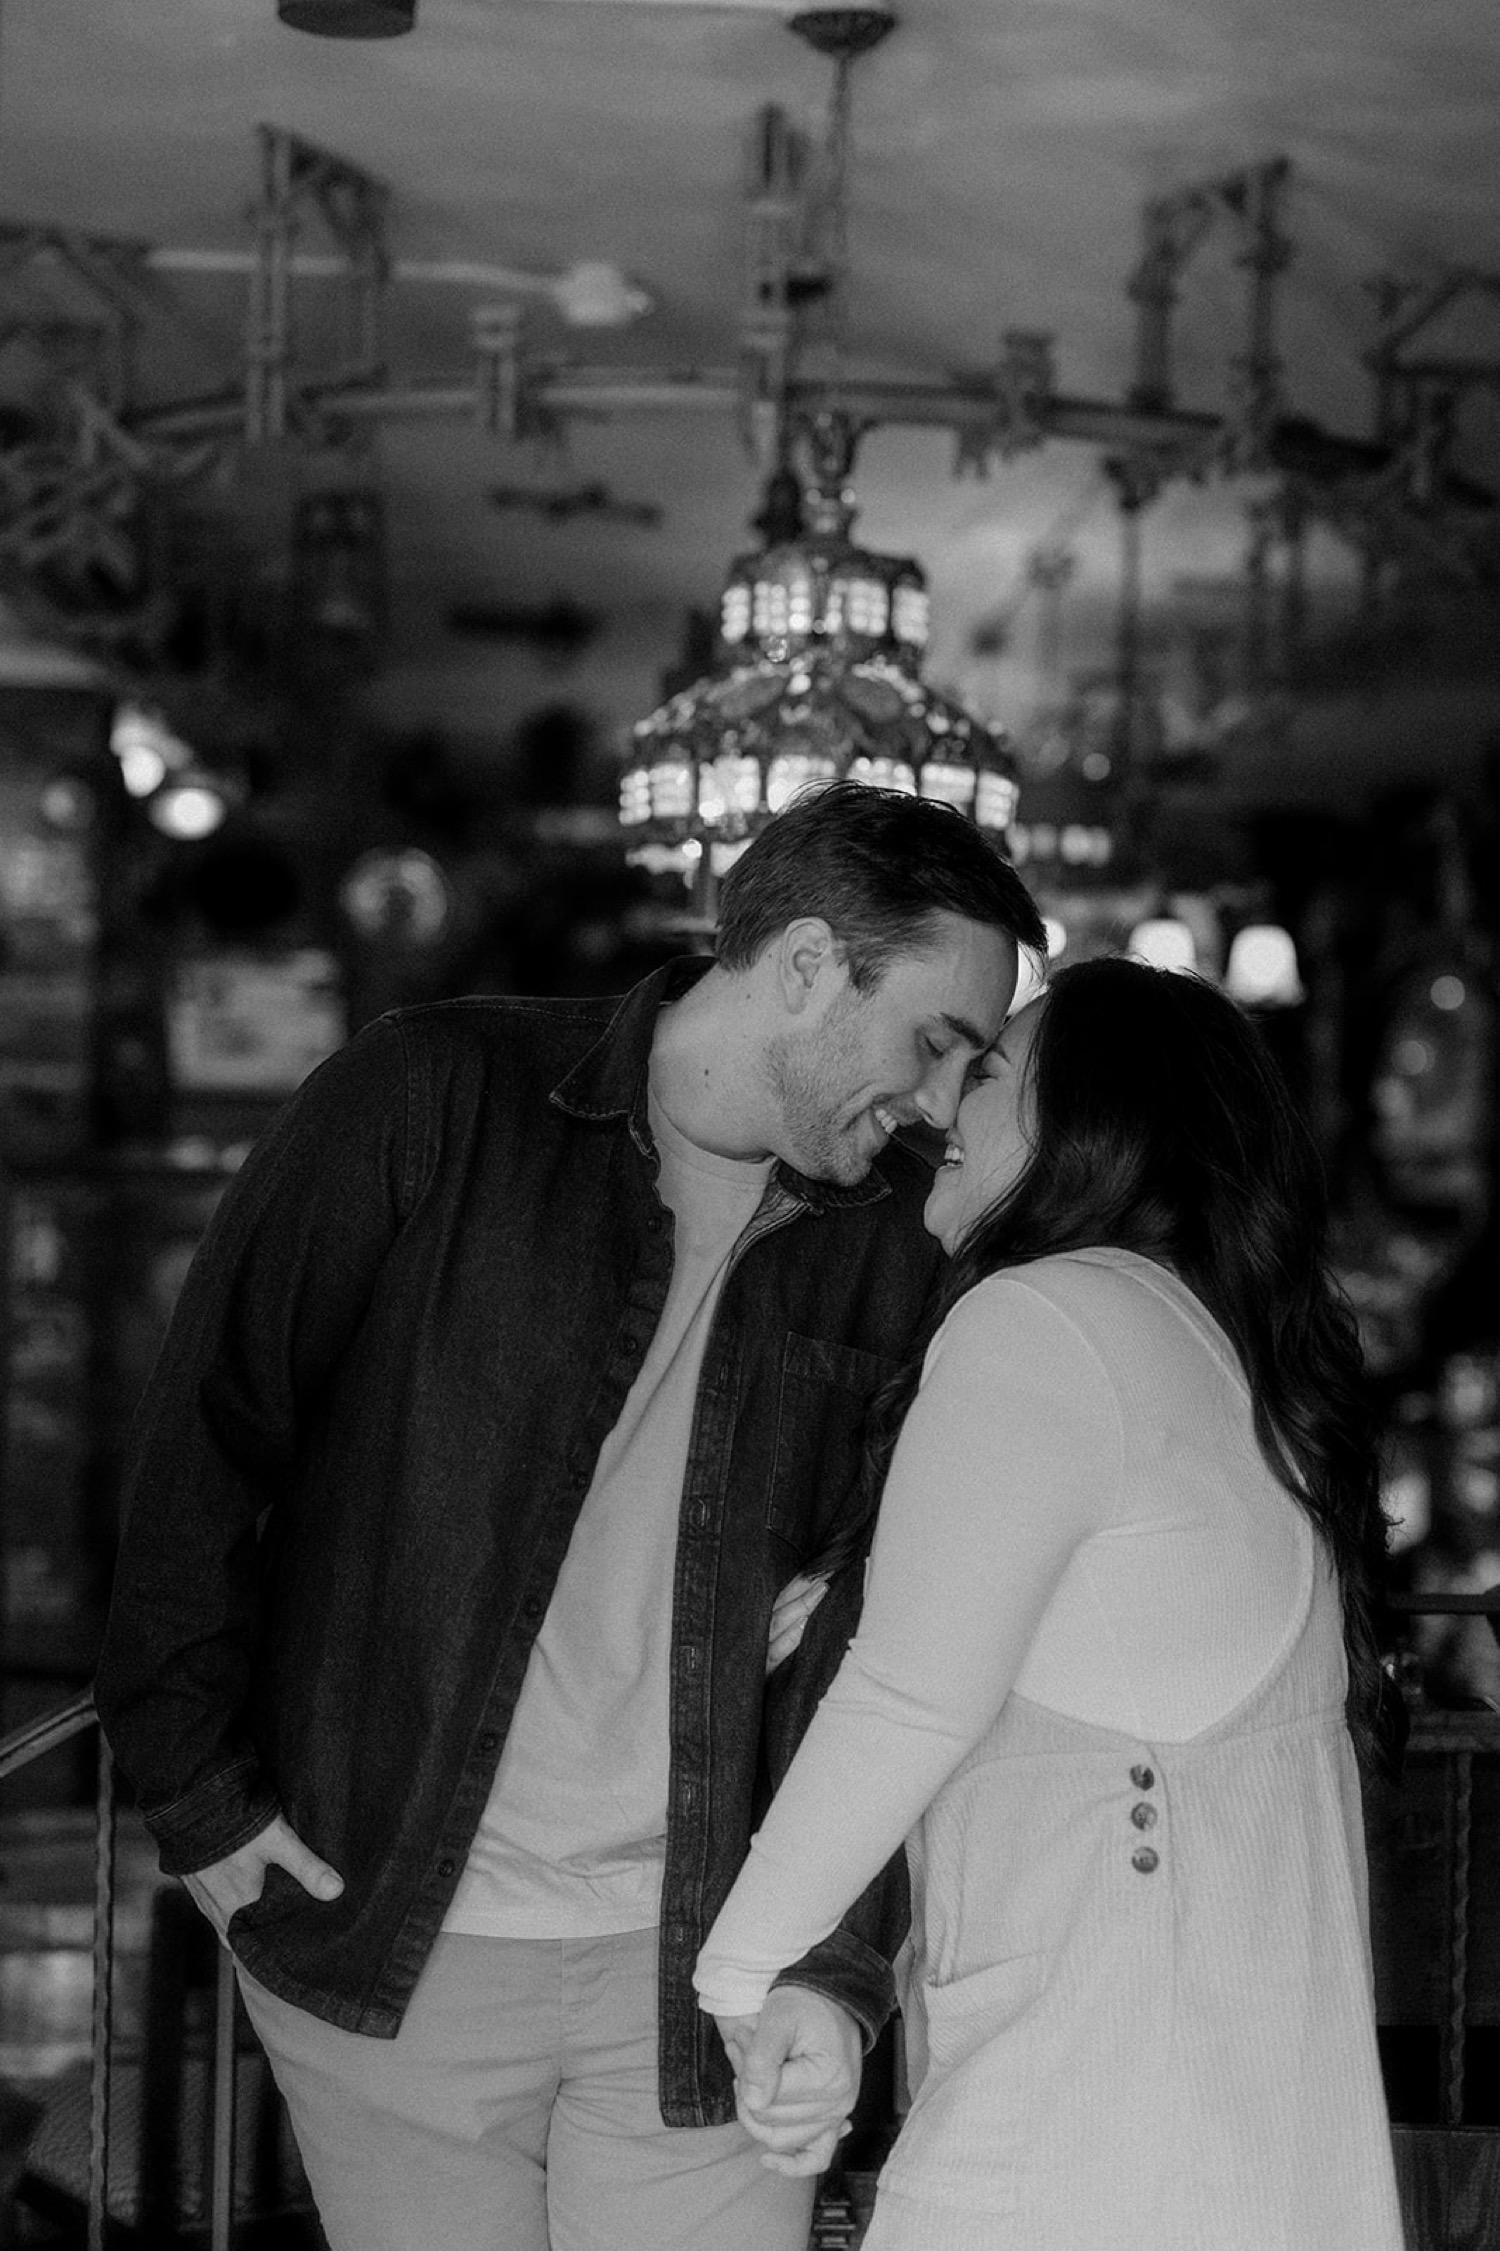 couple nose kiss in front of antique light fixtures